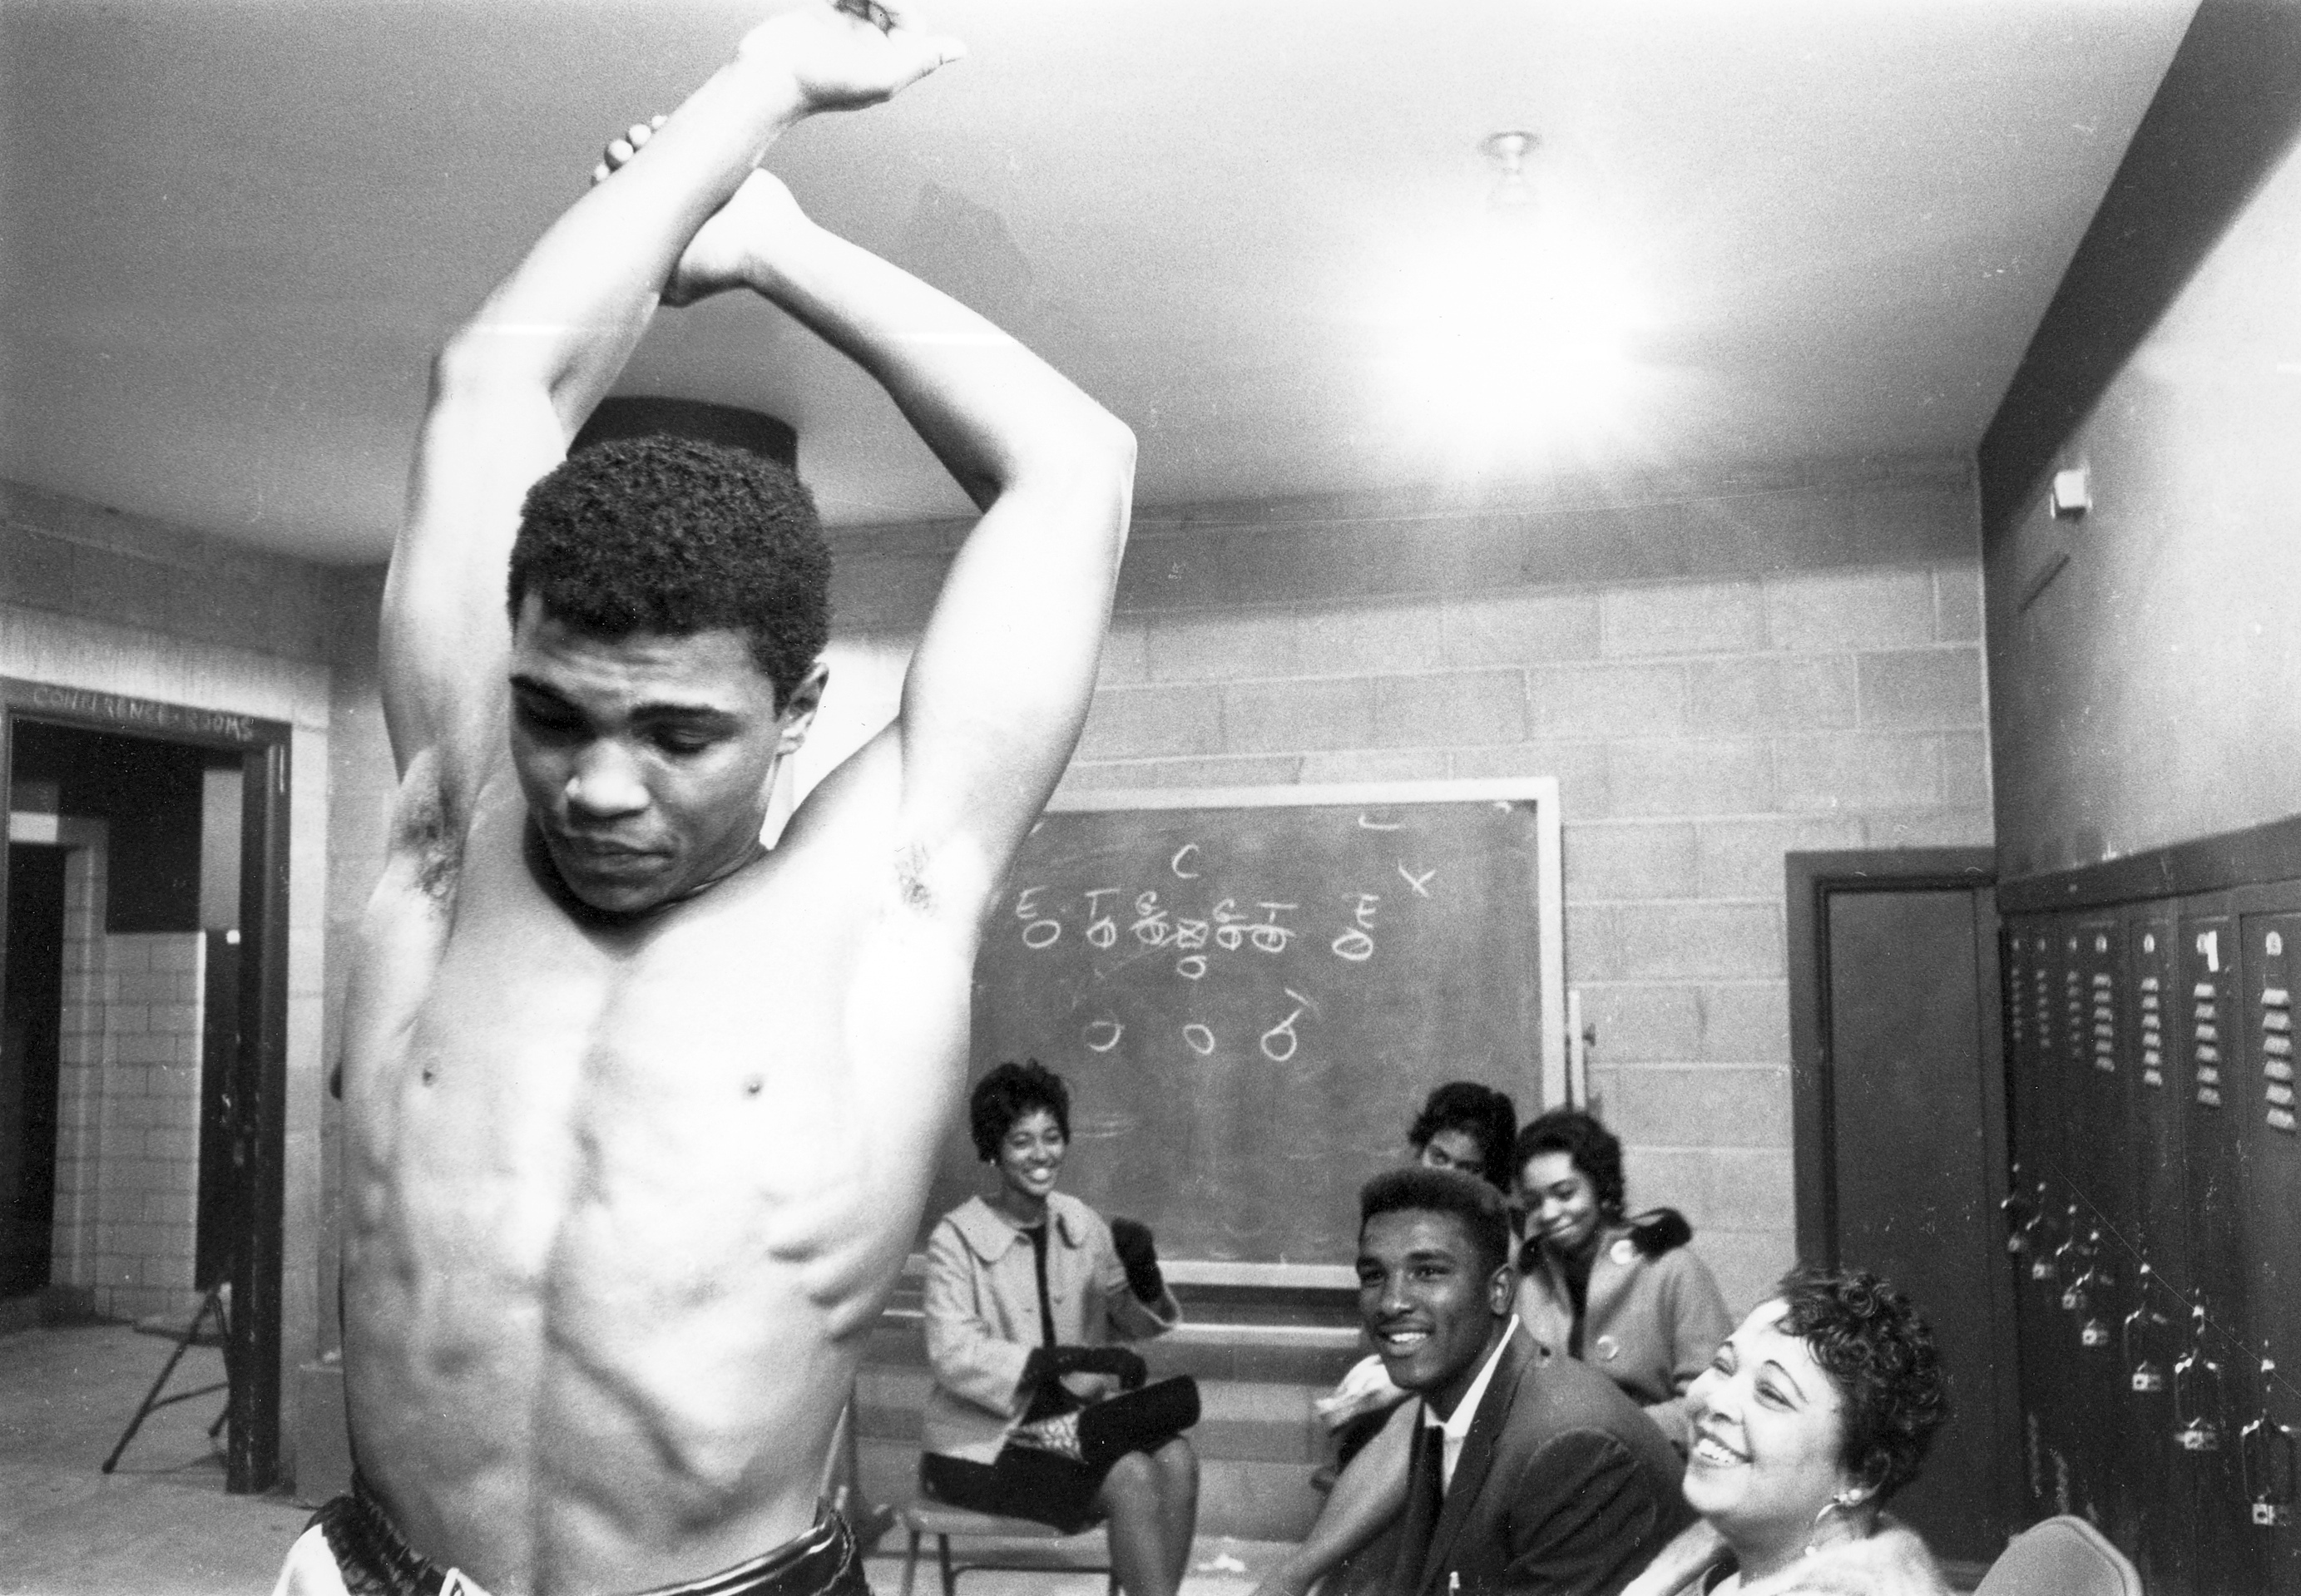 October 7, 1961, Louisville, Kentucky, USA: Muhammad Ali, future world heavyweight champion and legendary boxer, was still fighting under his birth name Cassius Clay when he knocked out Alex Miteff in the sixth round. In the arena's basement before the fight, Ali had a mixture of female admirers and relatives. His brother Rudy Clay, later known as Rahman Ali, was also on hand as Ali's official gofer.///Cassius Clay (Muhammad Ali) with fans and family in the locker room., Image: 113427121, License: Rights-managed, Restrictions: EXCLUSIVE, Special Rates Apply, Model Release: no, Credit line: Profimedia, Polaris